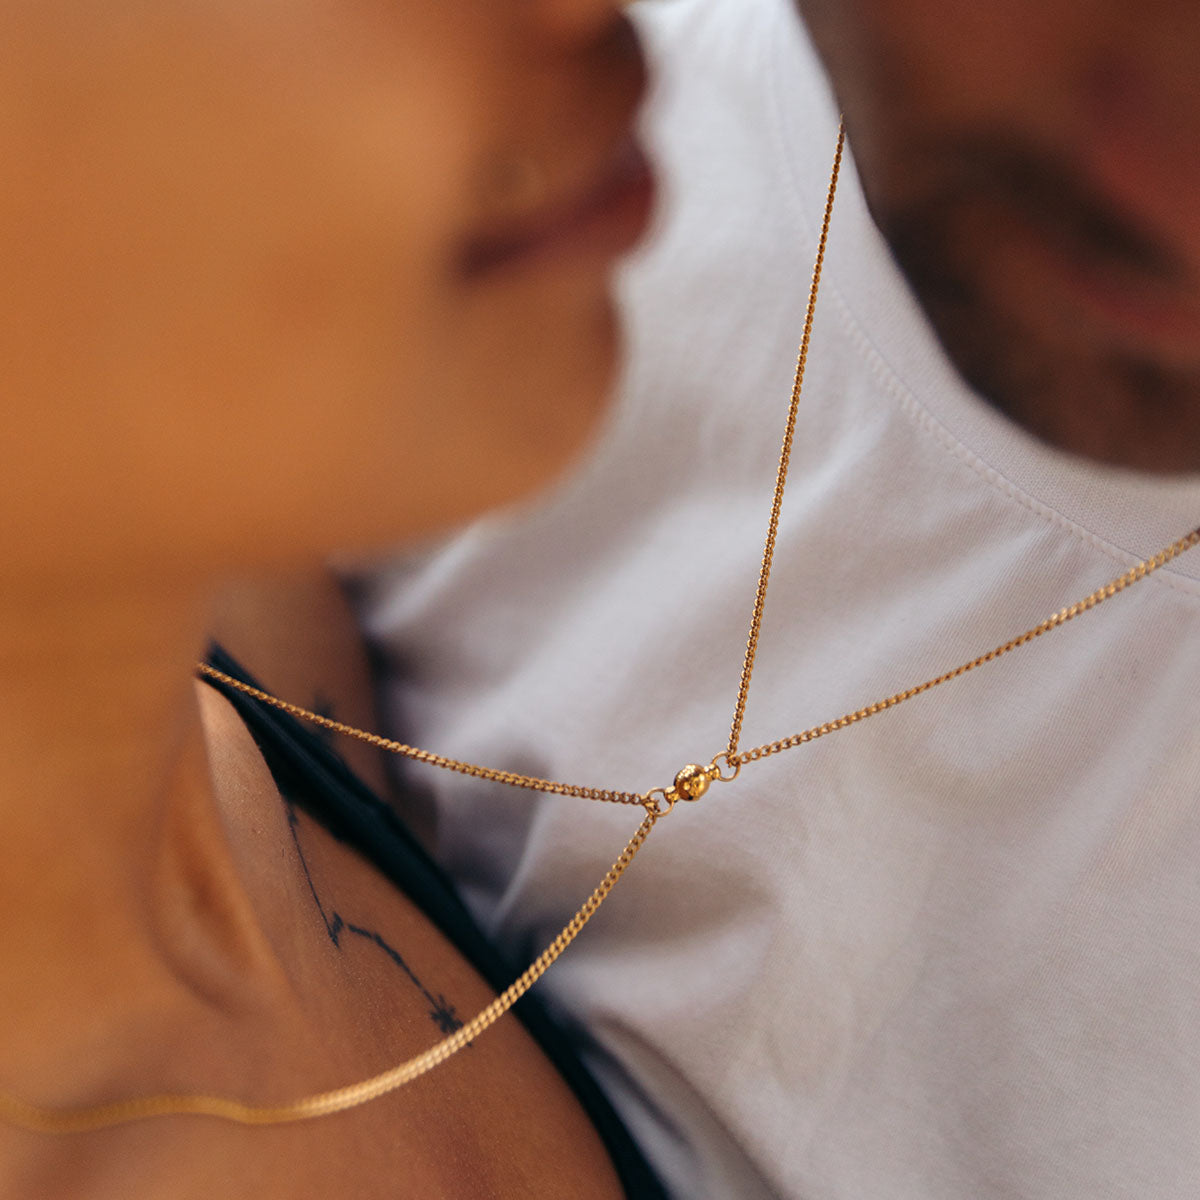 Magnetic chain necklaces in gold connected